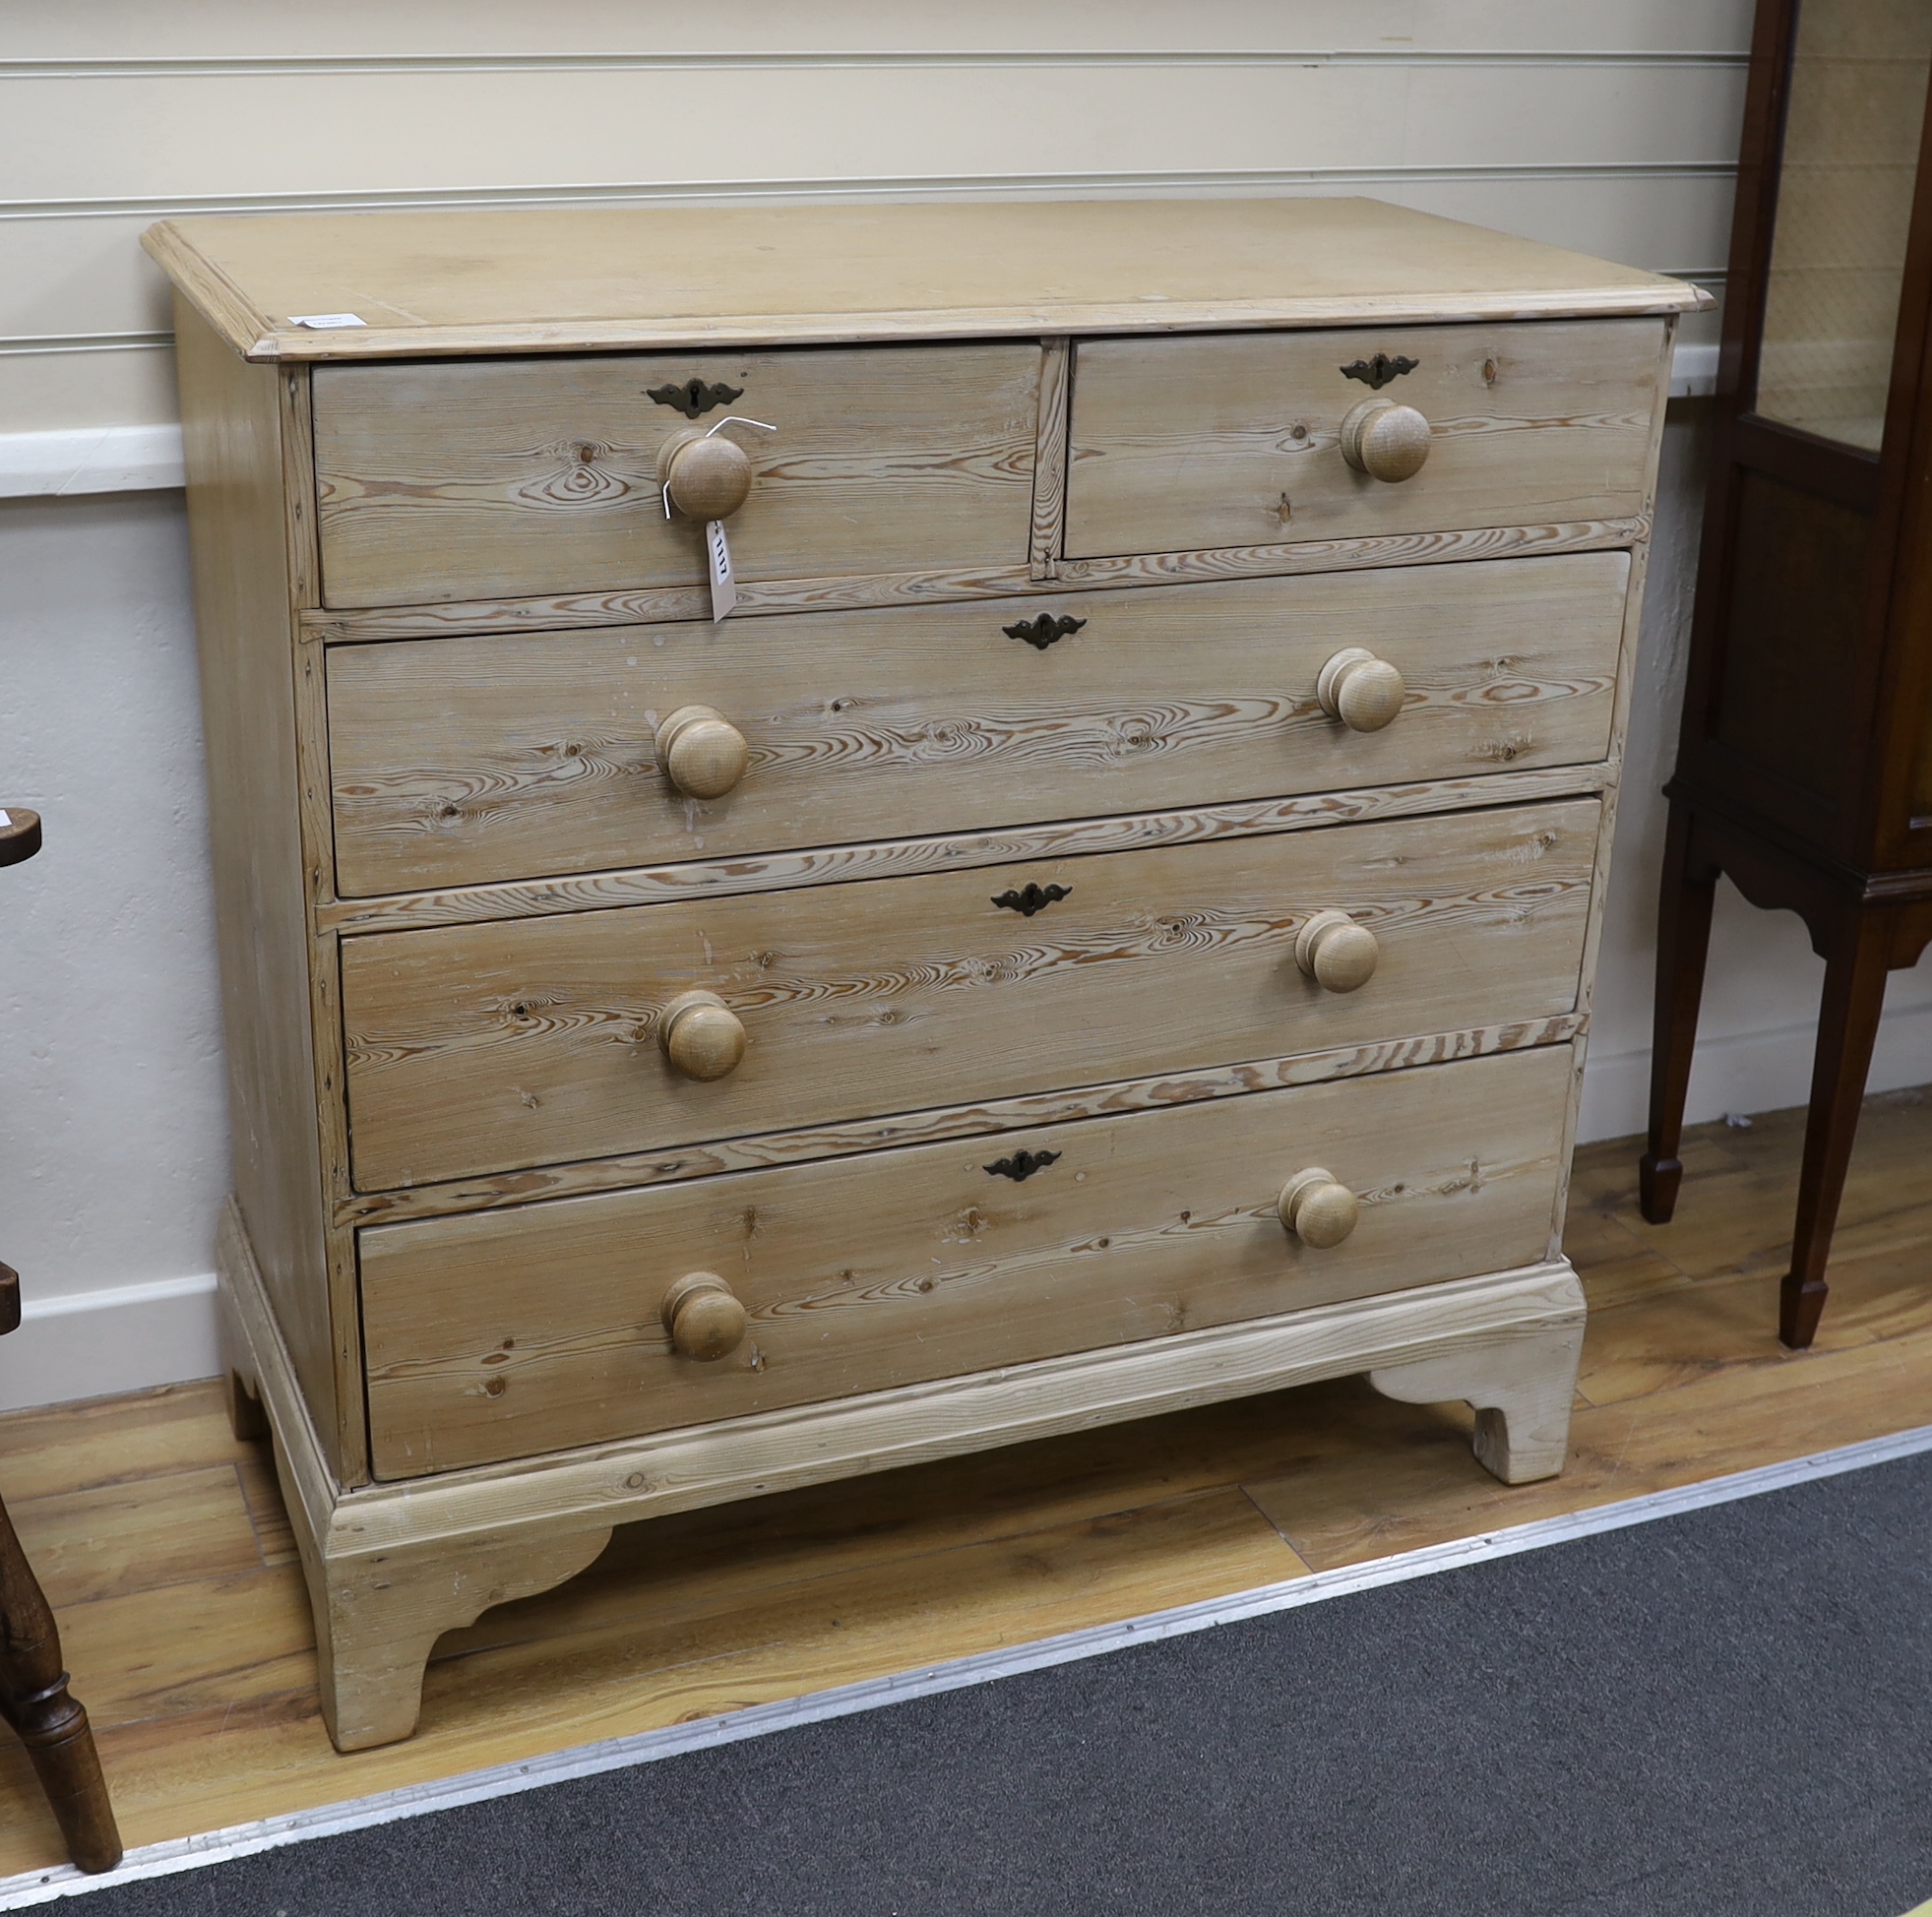 An early 19th century pine chest of five drawers, width 106cm, depth 49cm, height 102cm